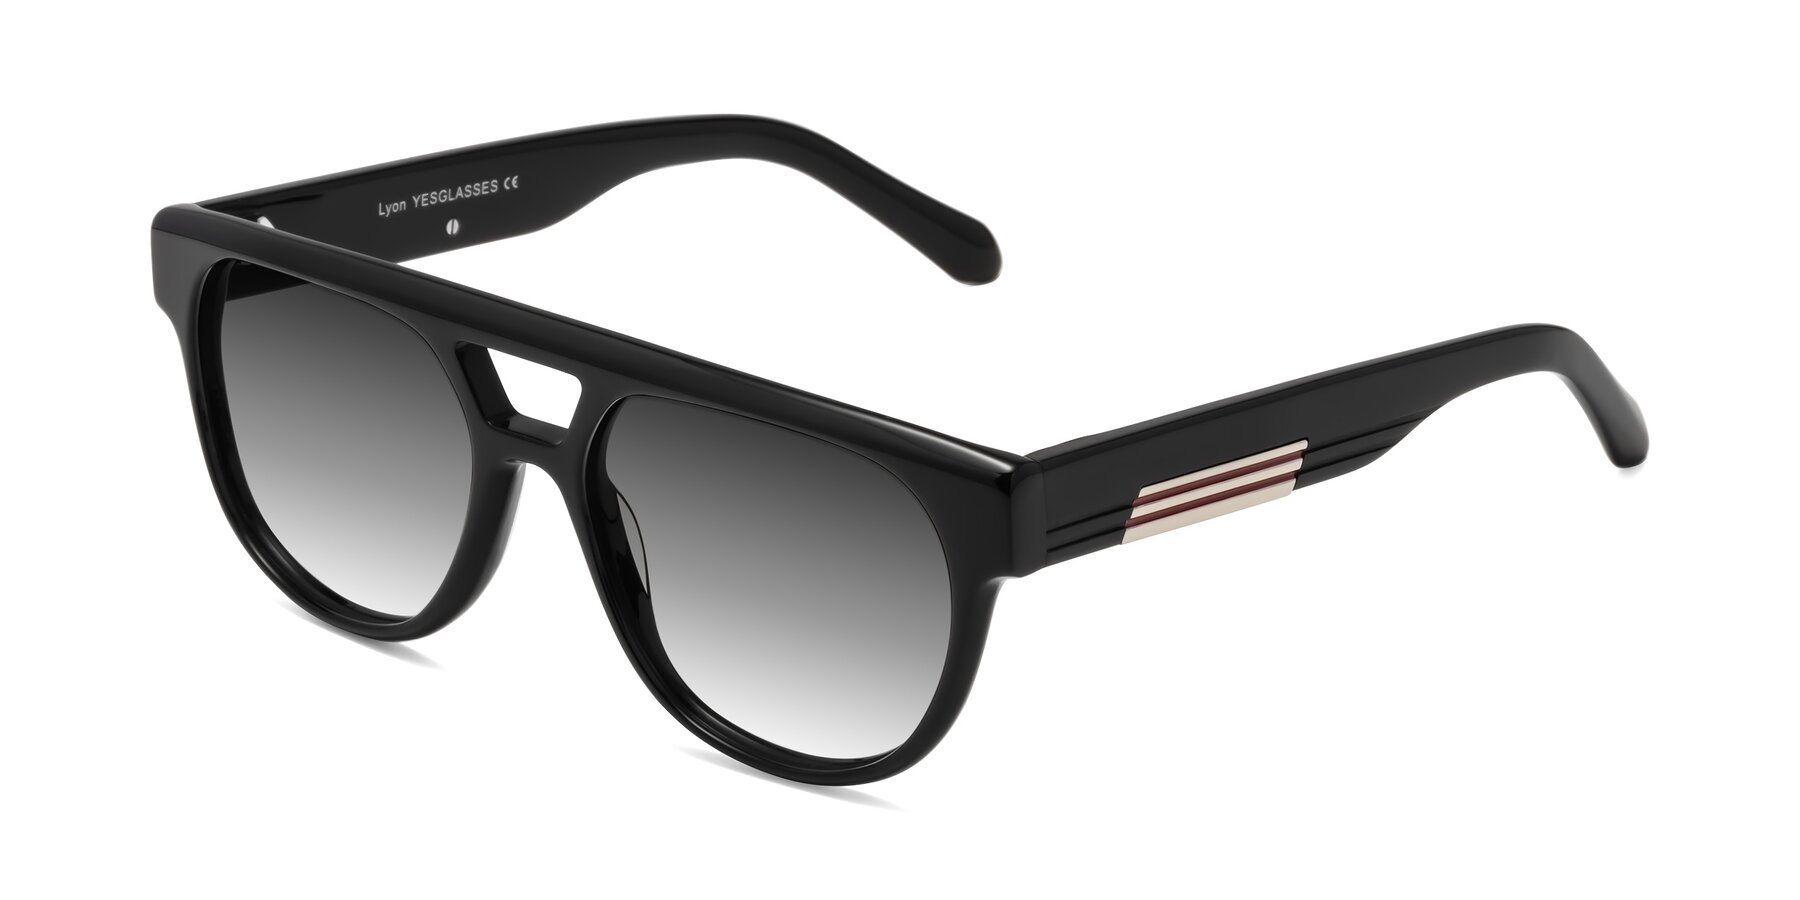 Angle of Lyon in Black with Gray Gradient Lenses